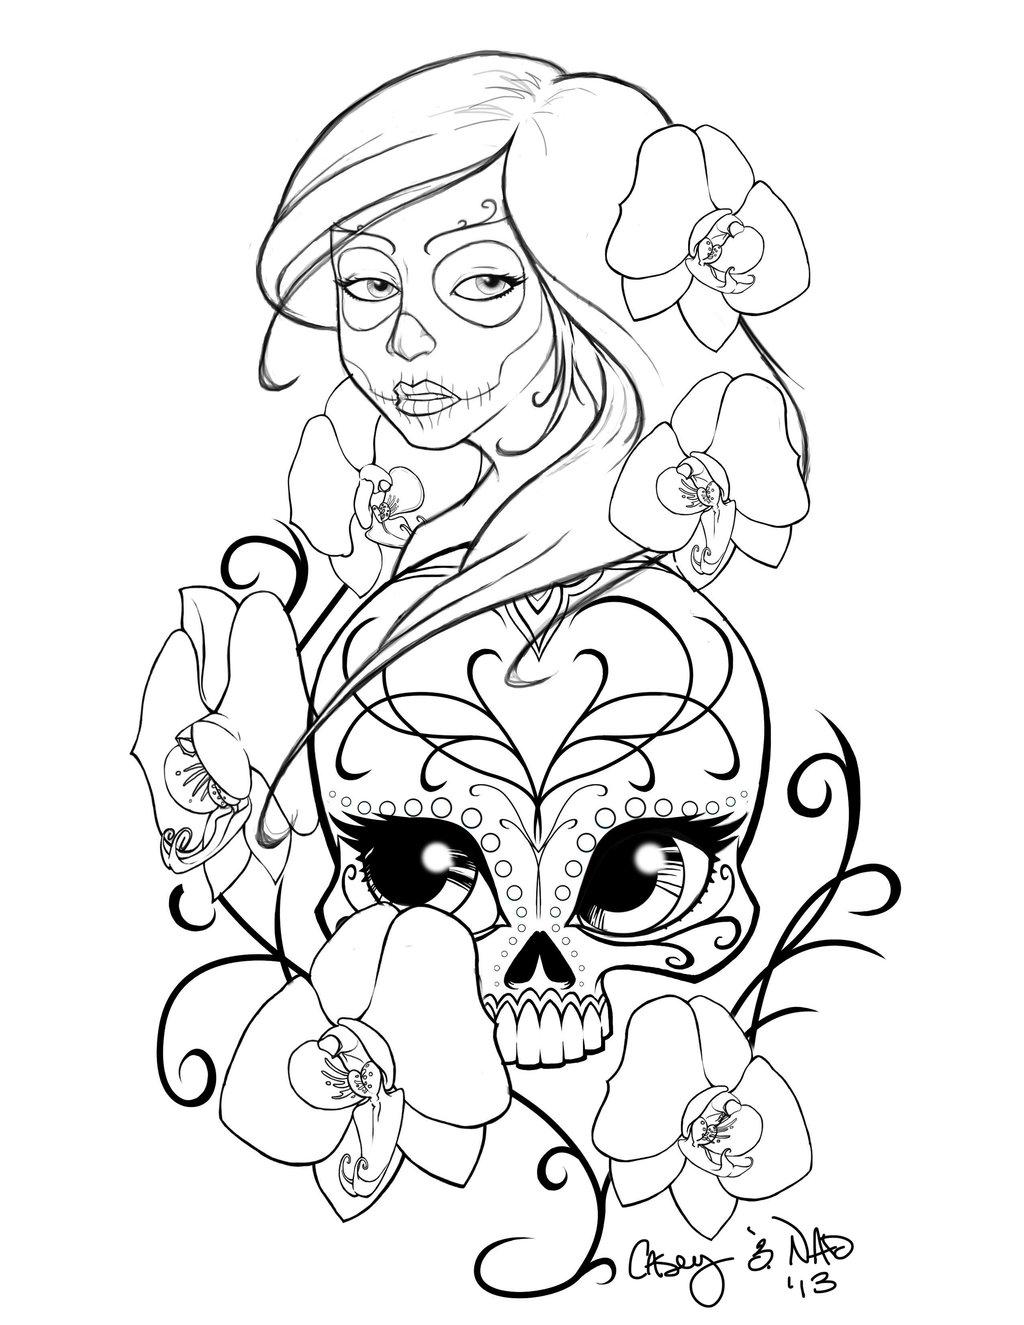 sugar skull colouring pages page id 53127 : Uncategorized - yoand.